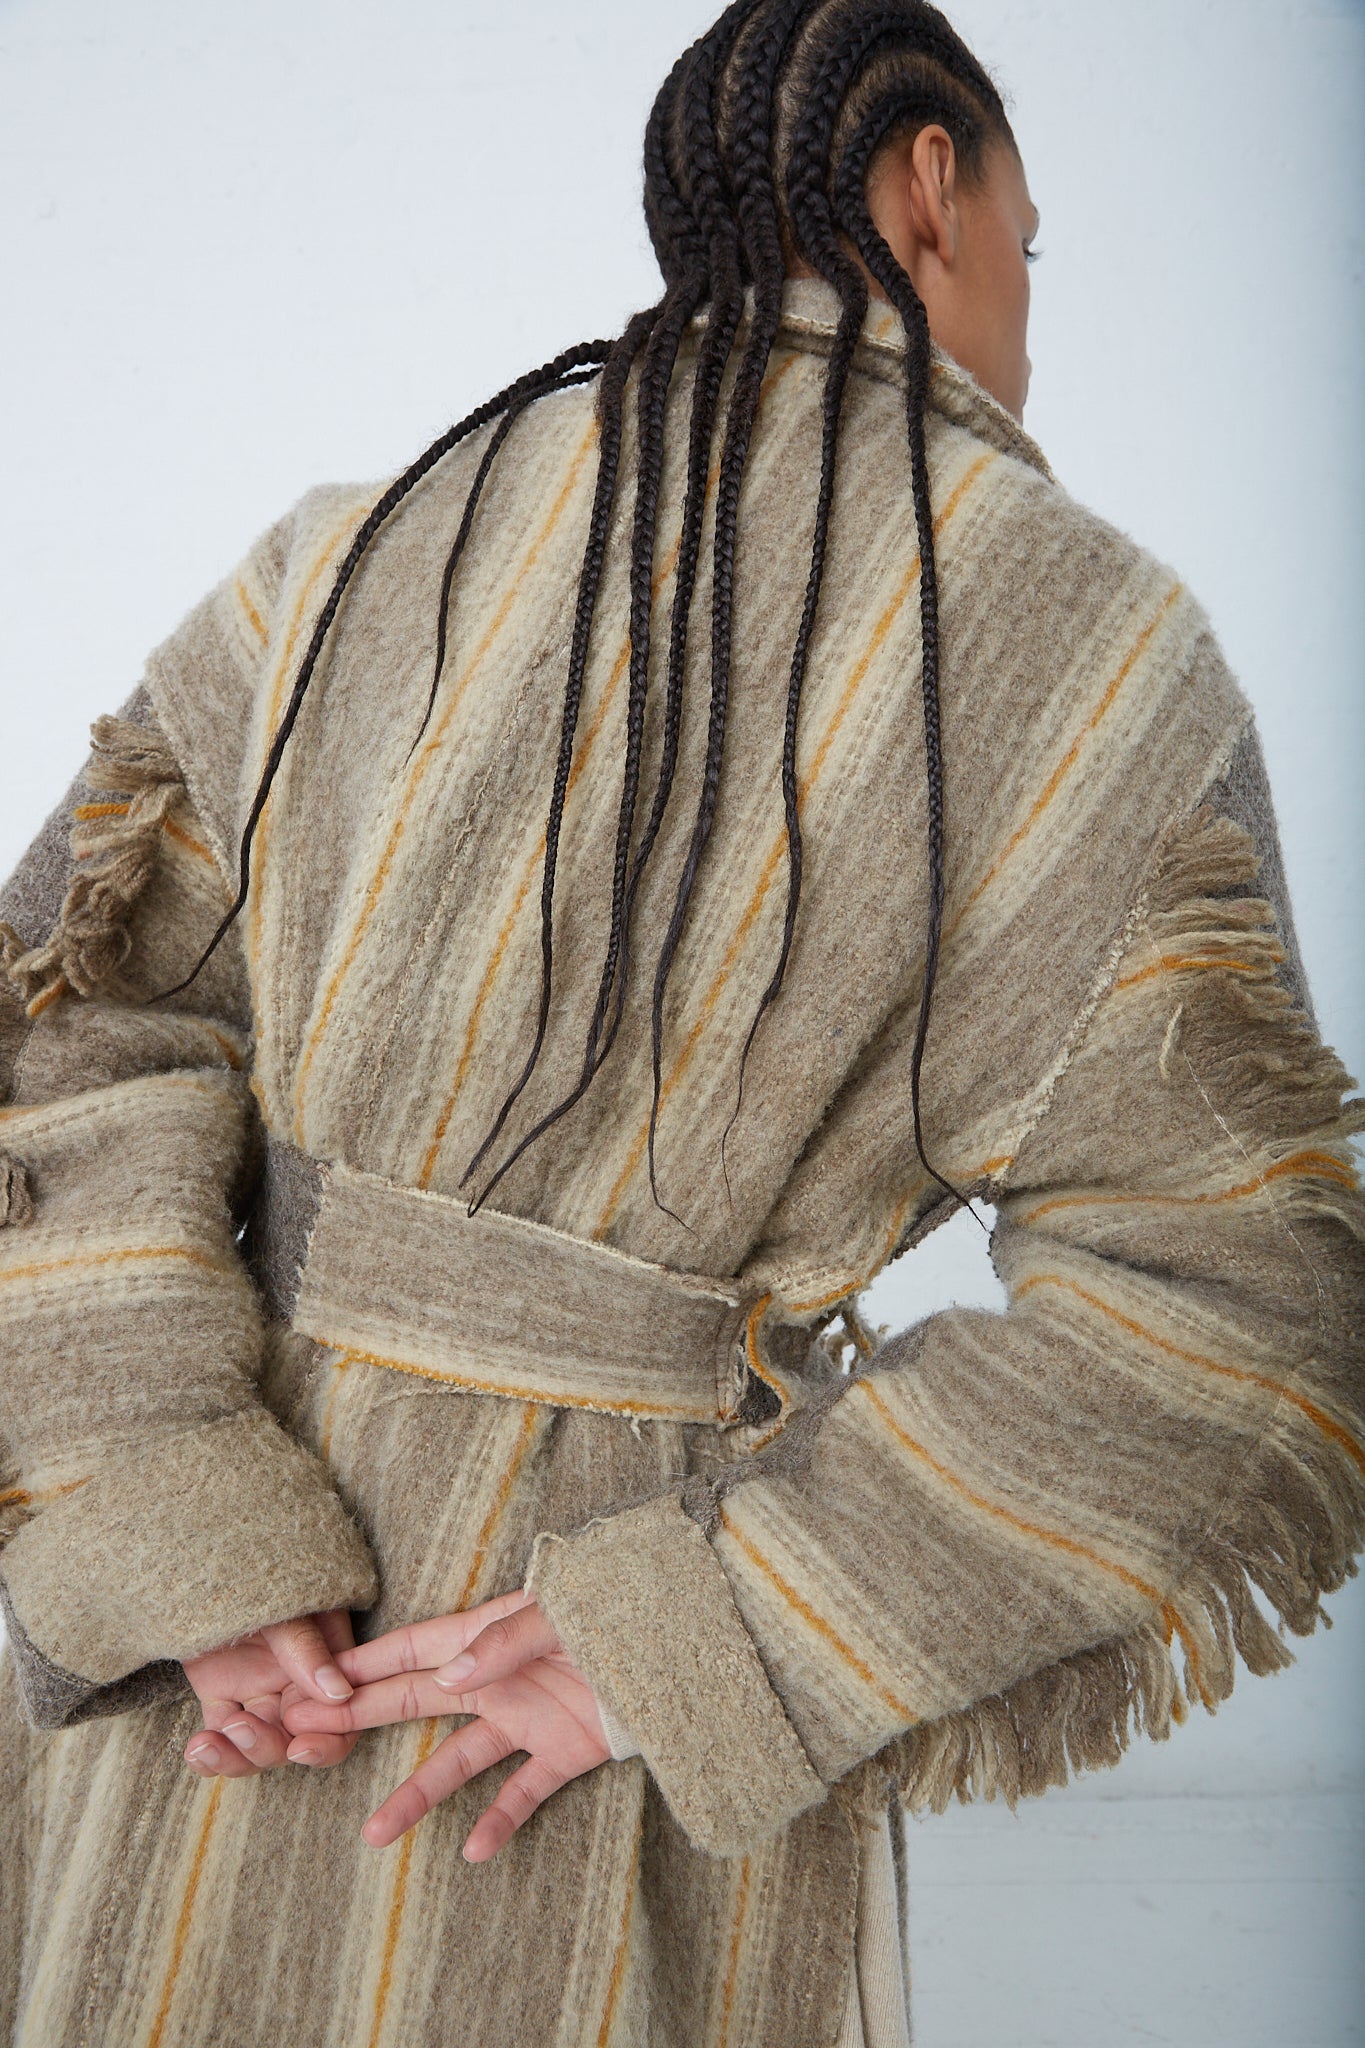 A woman wearing a Thank You Have A Good Day Wool Blanket Swing Trench coat with fringes. Back view. Up close.